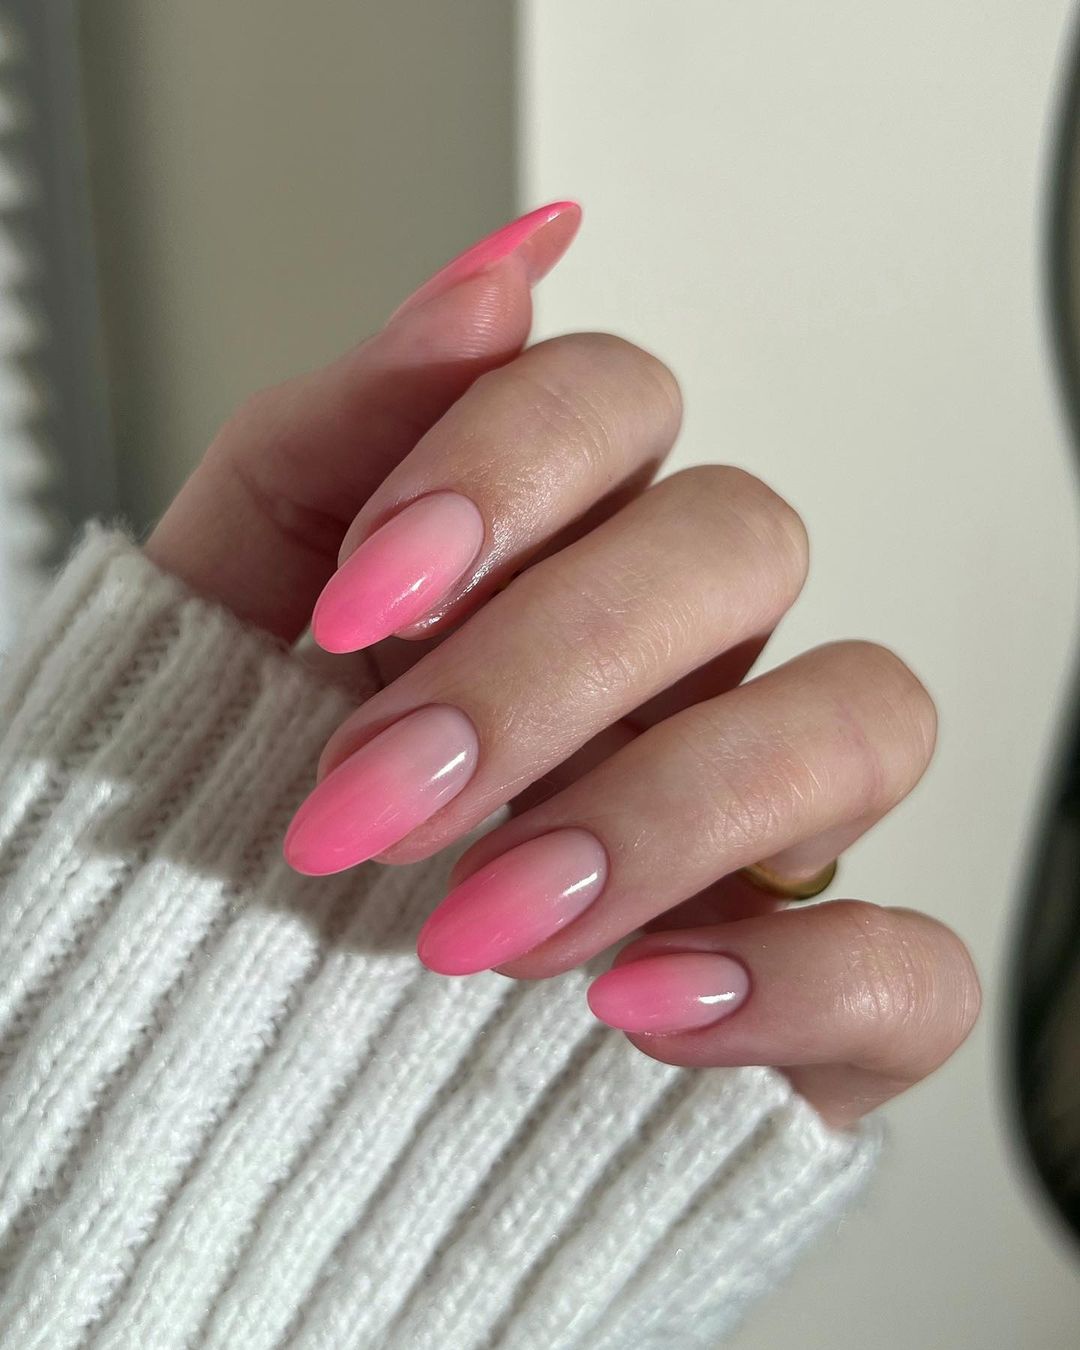 Spring Almond Nails with Pink Ombre Design